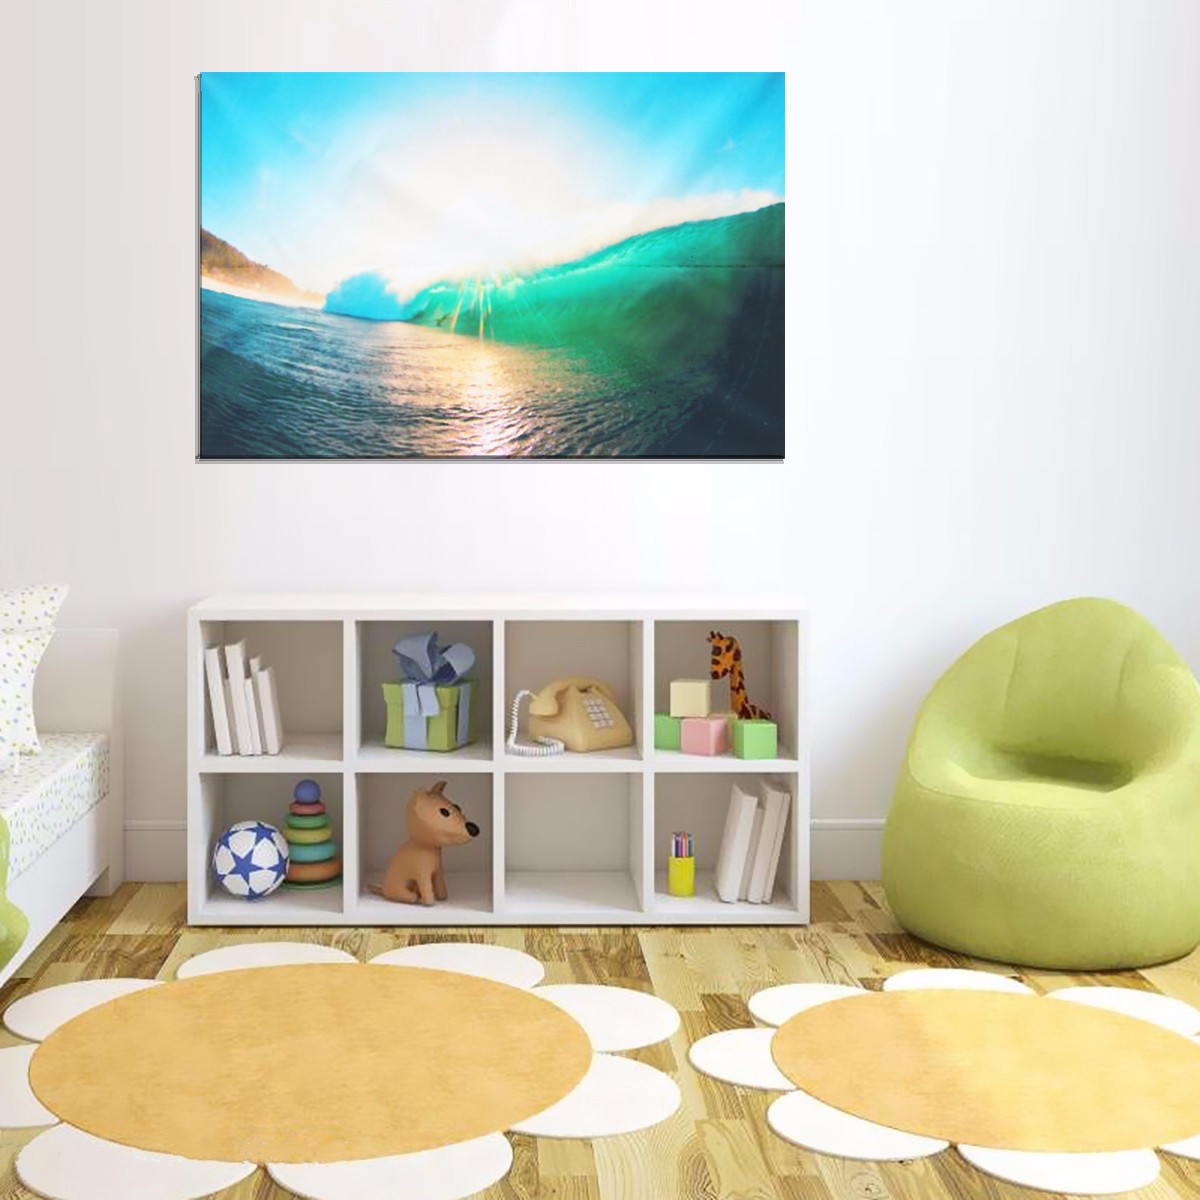 60x90CM-Sunshine-and-Sea-Natural-Scenery-Art-Picture-Silk-Poster-Fabric-Print-Wall-Decor-1079142